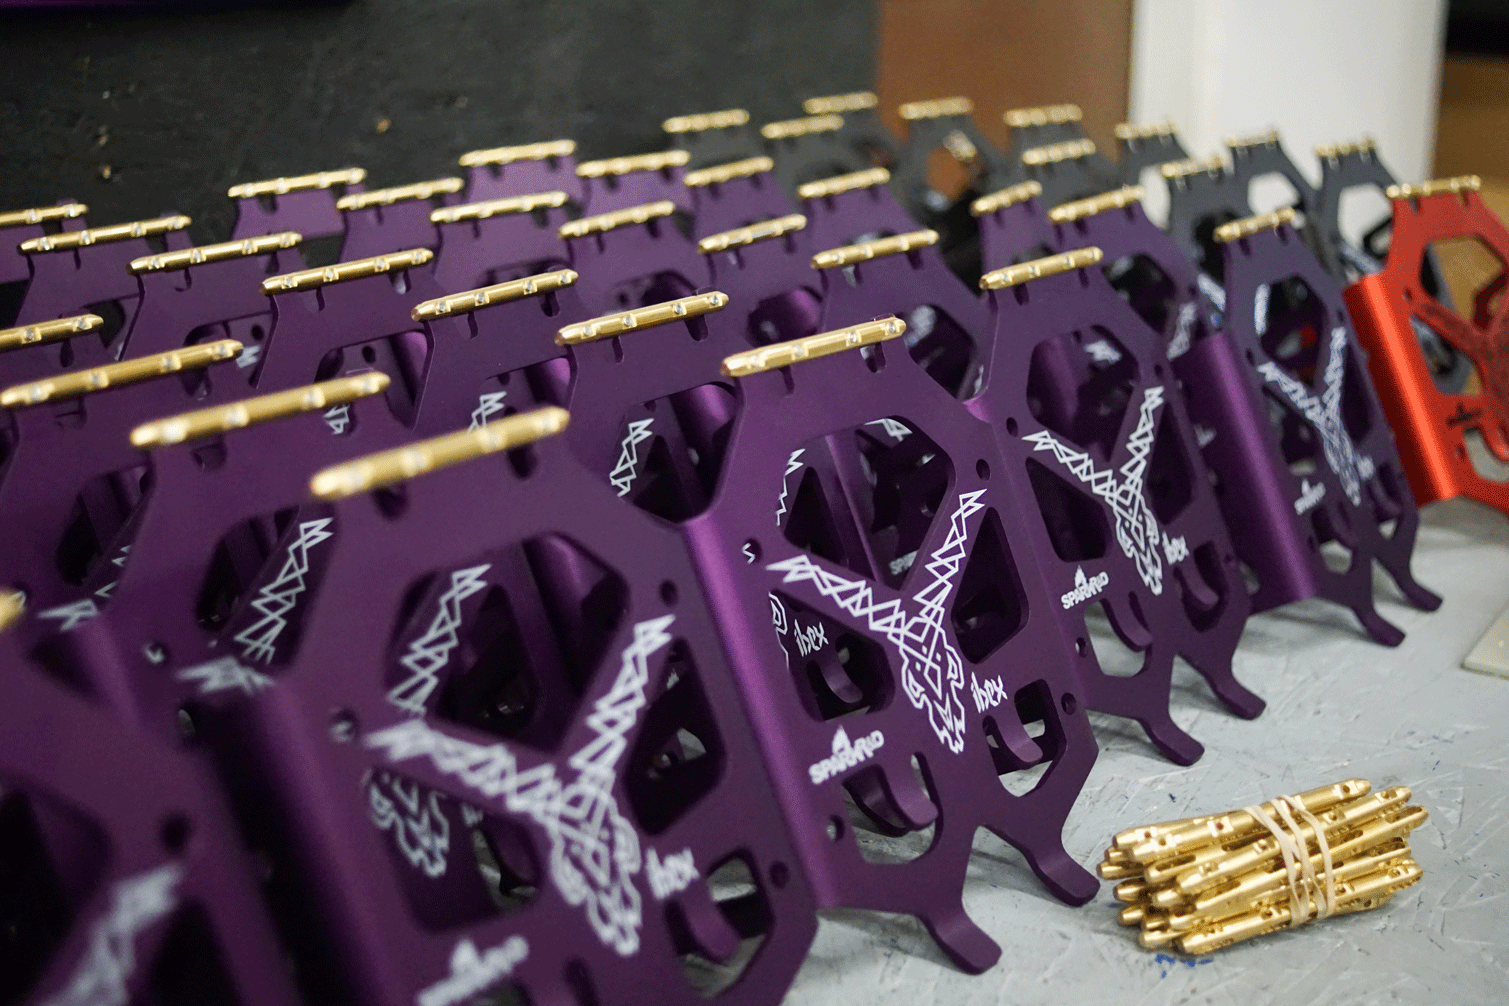 anodized crampons